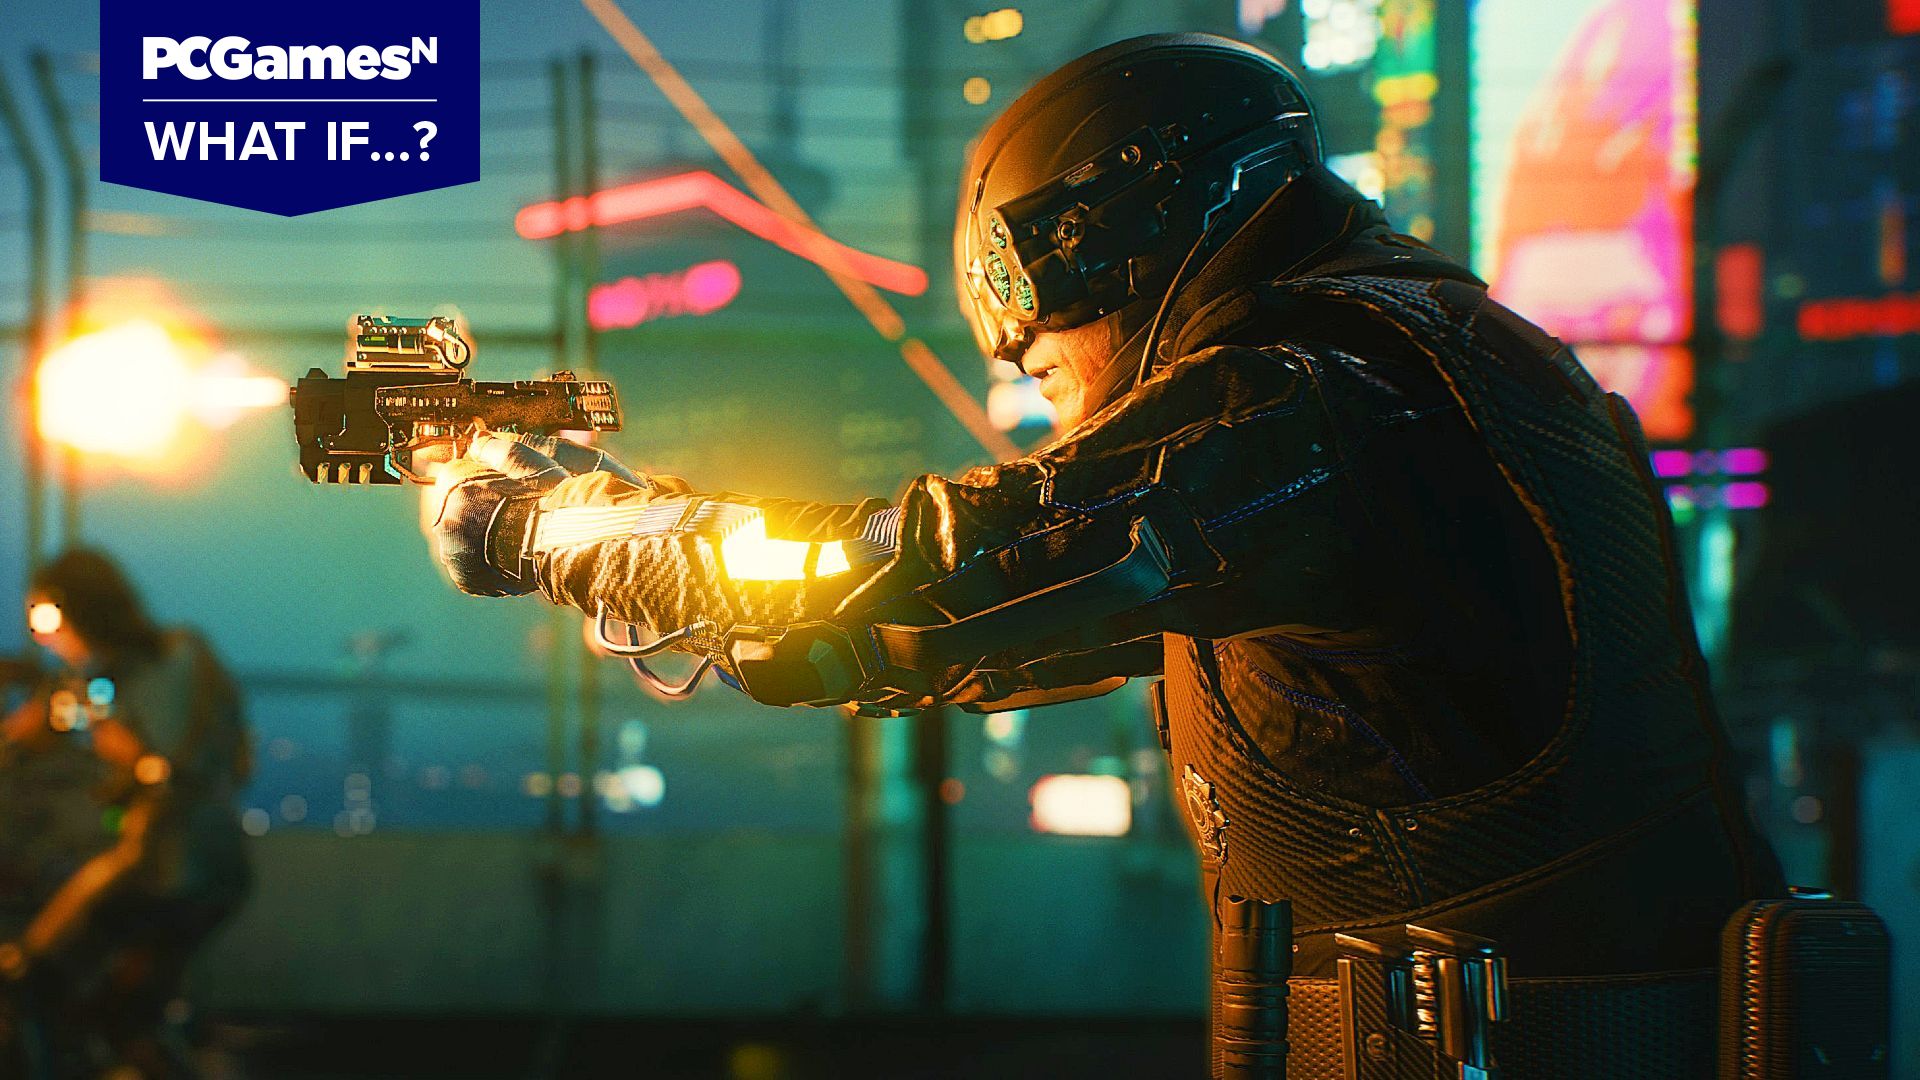 What if: Cyberpunk 2077 came out right now?